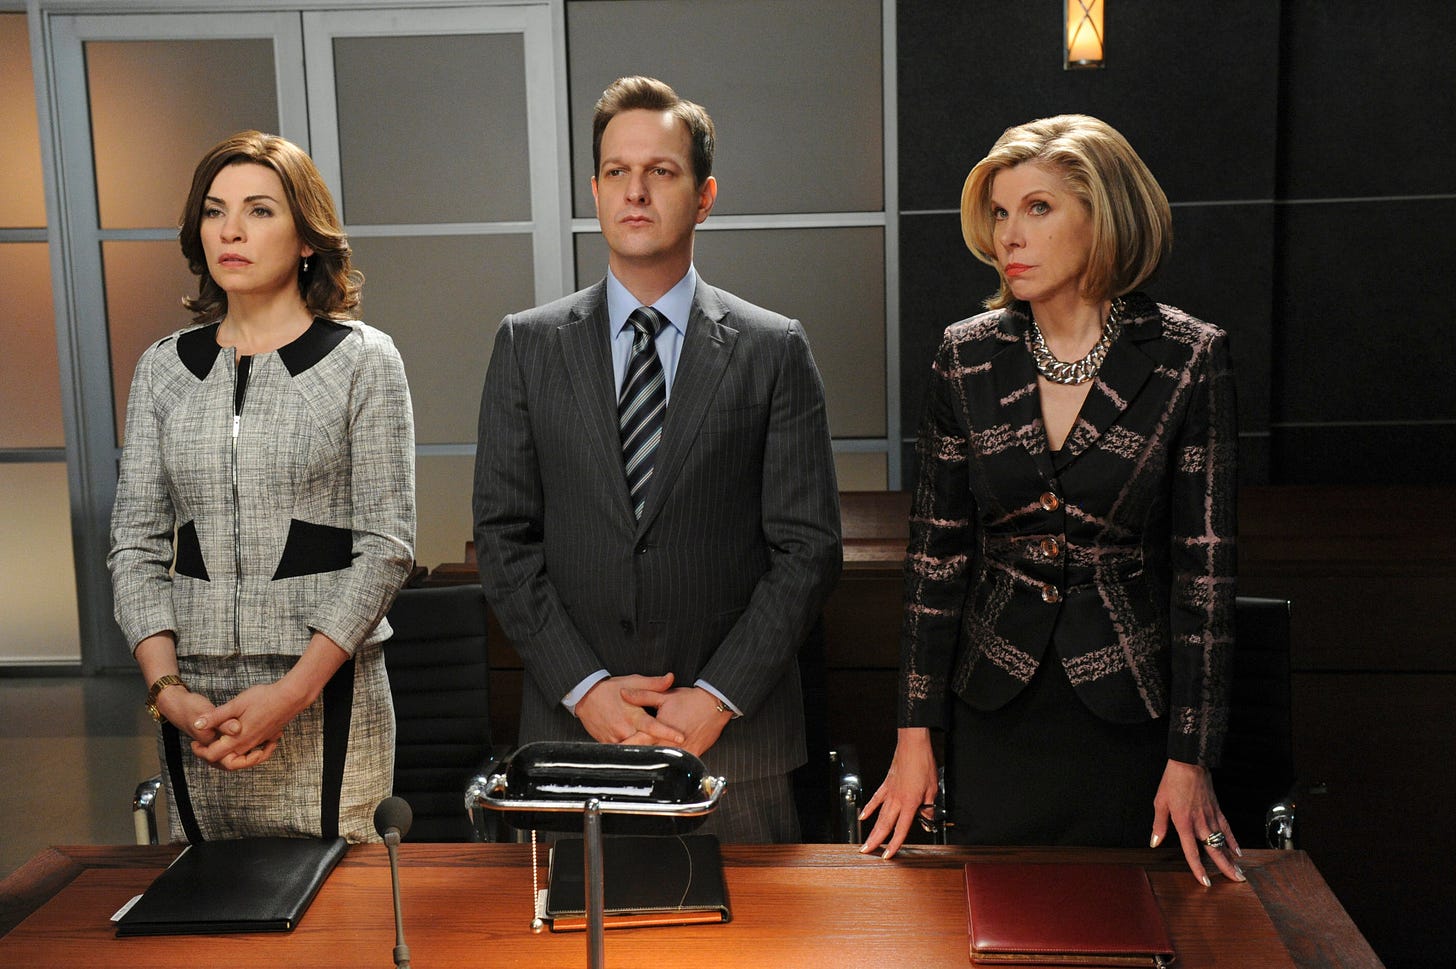 This Is Why You Should Watch 'The Good Wife' - The New York Times